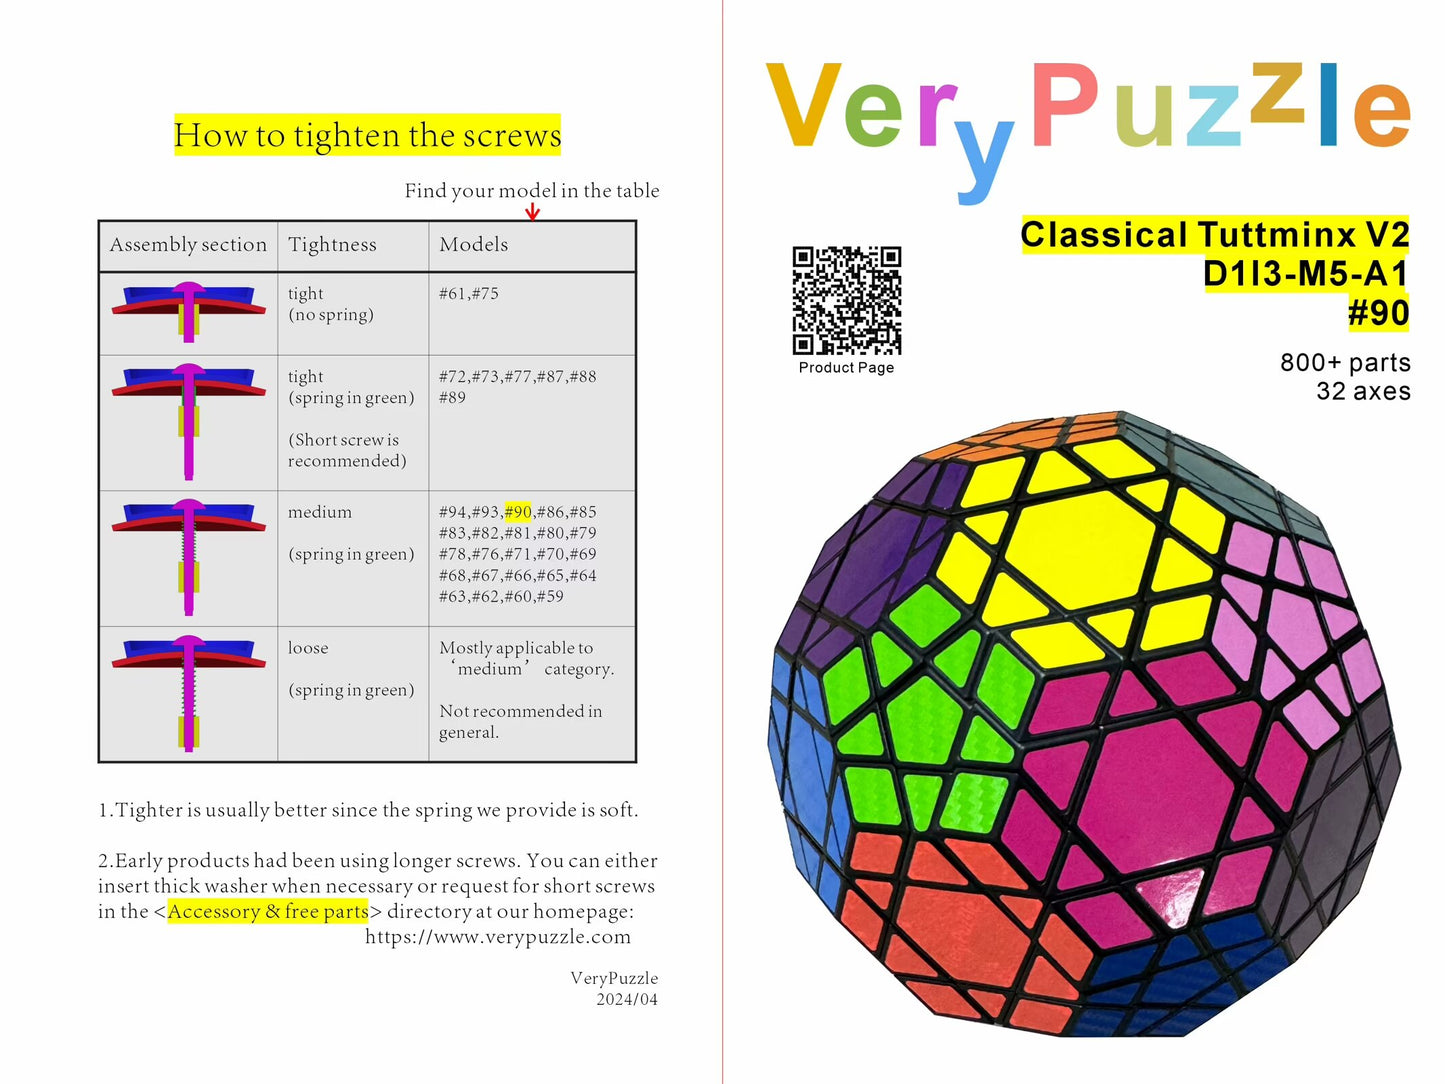 Verypuzzle #90 Classical Tuttminx V2 Reset Edition